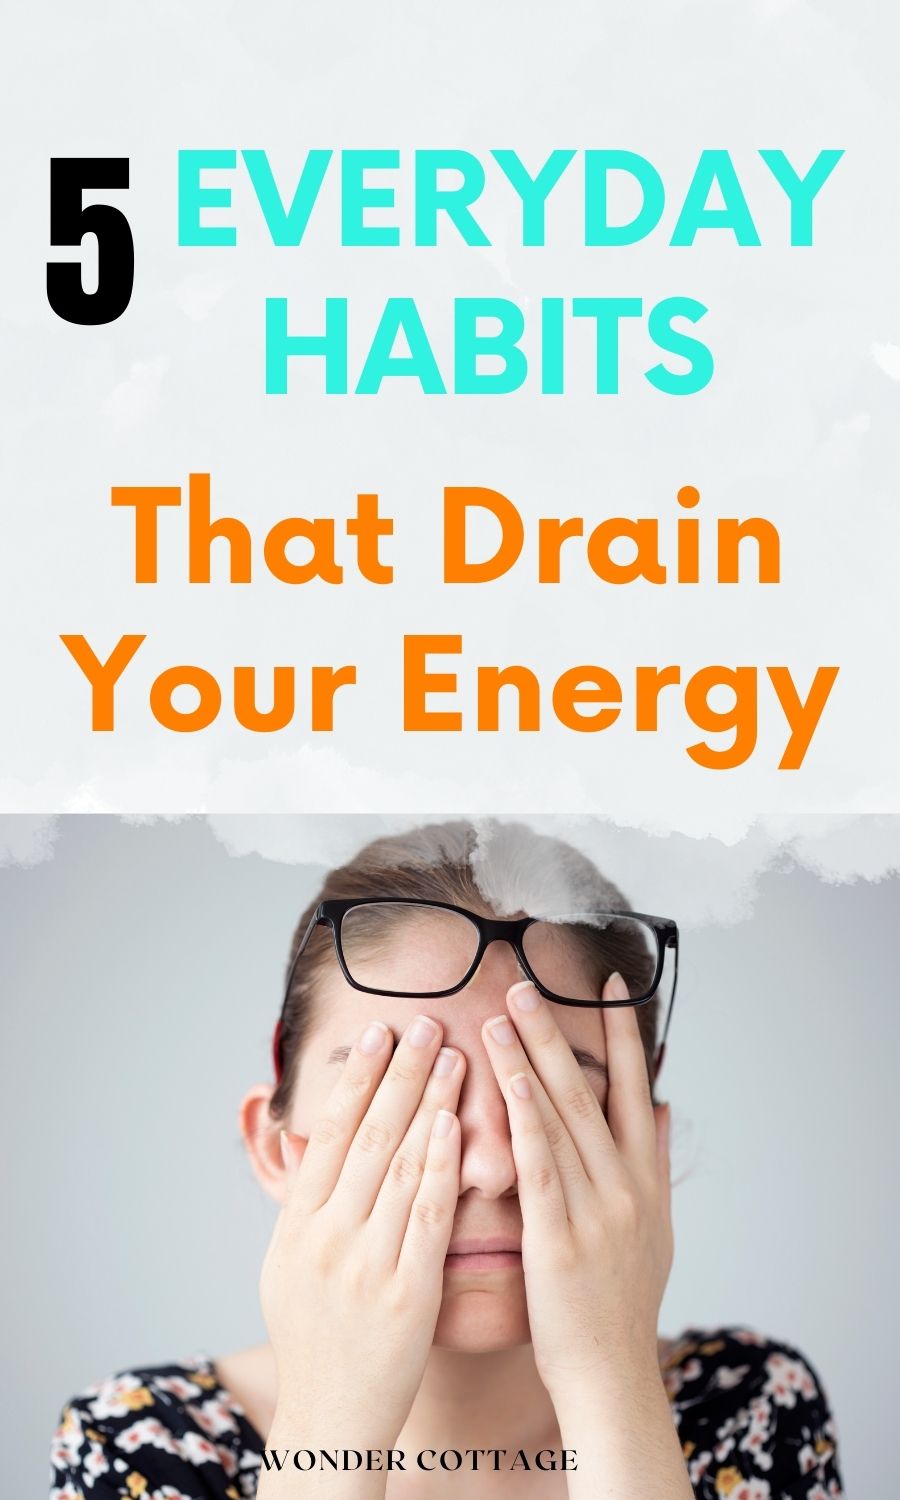 5 Everyday Habits That Drain Your Energy